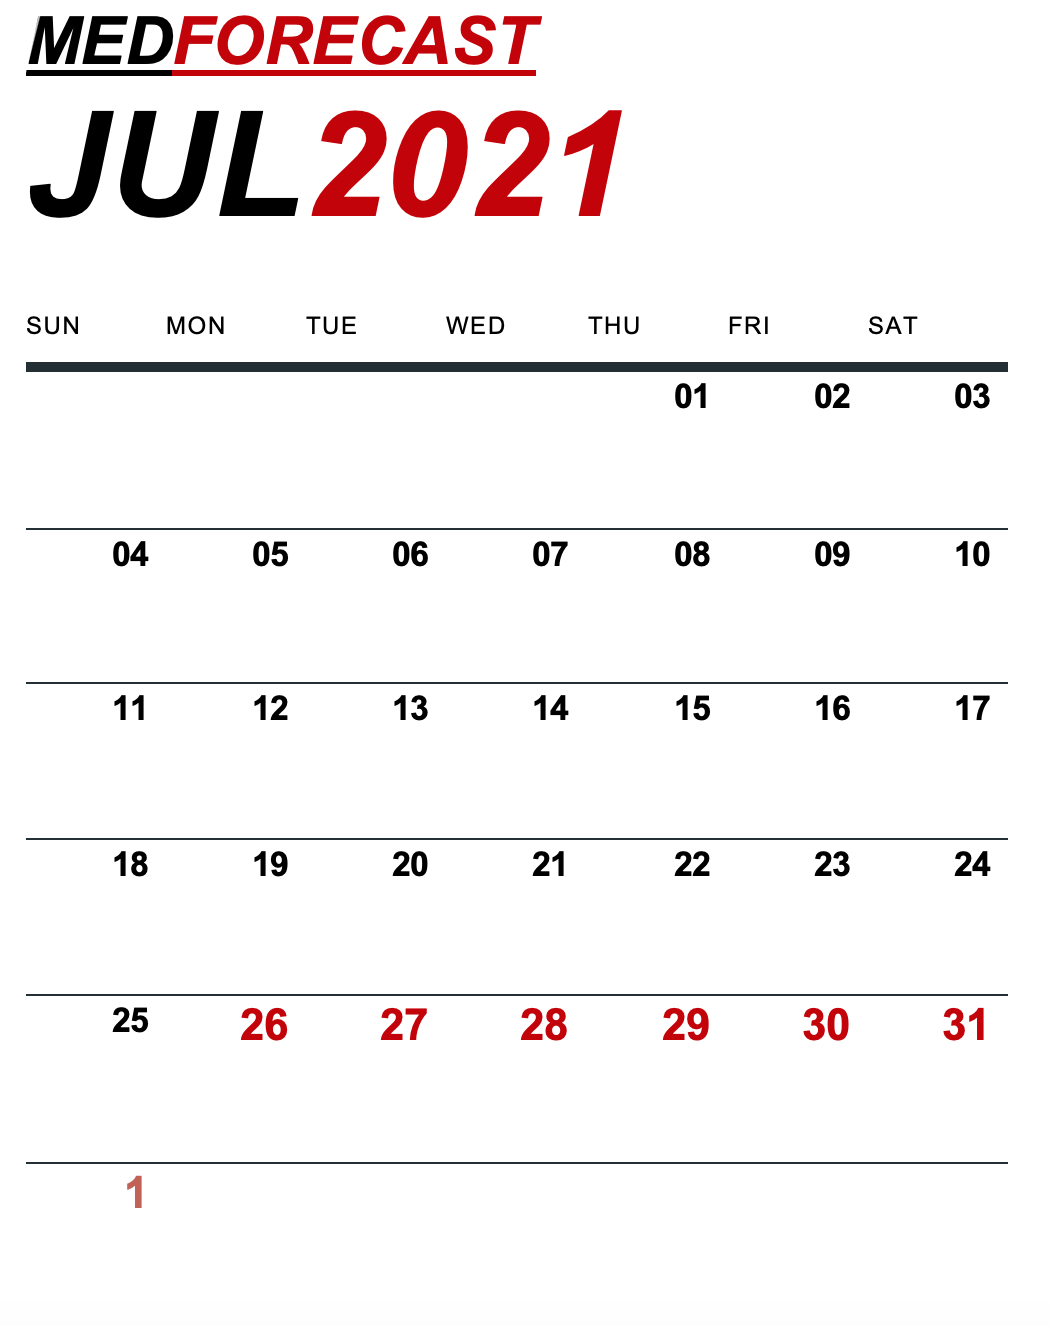 Medical News Forecast for July 26-August 1